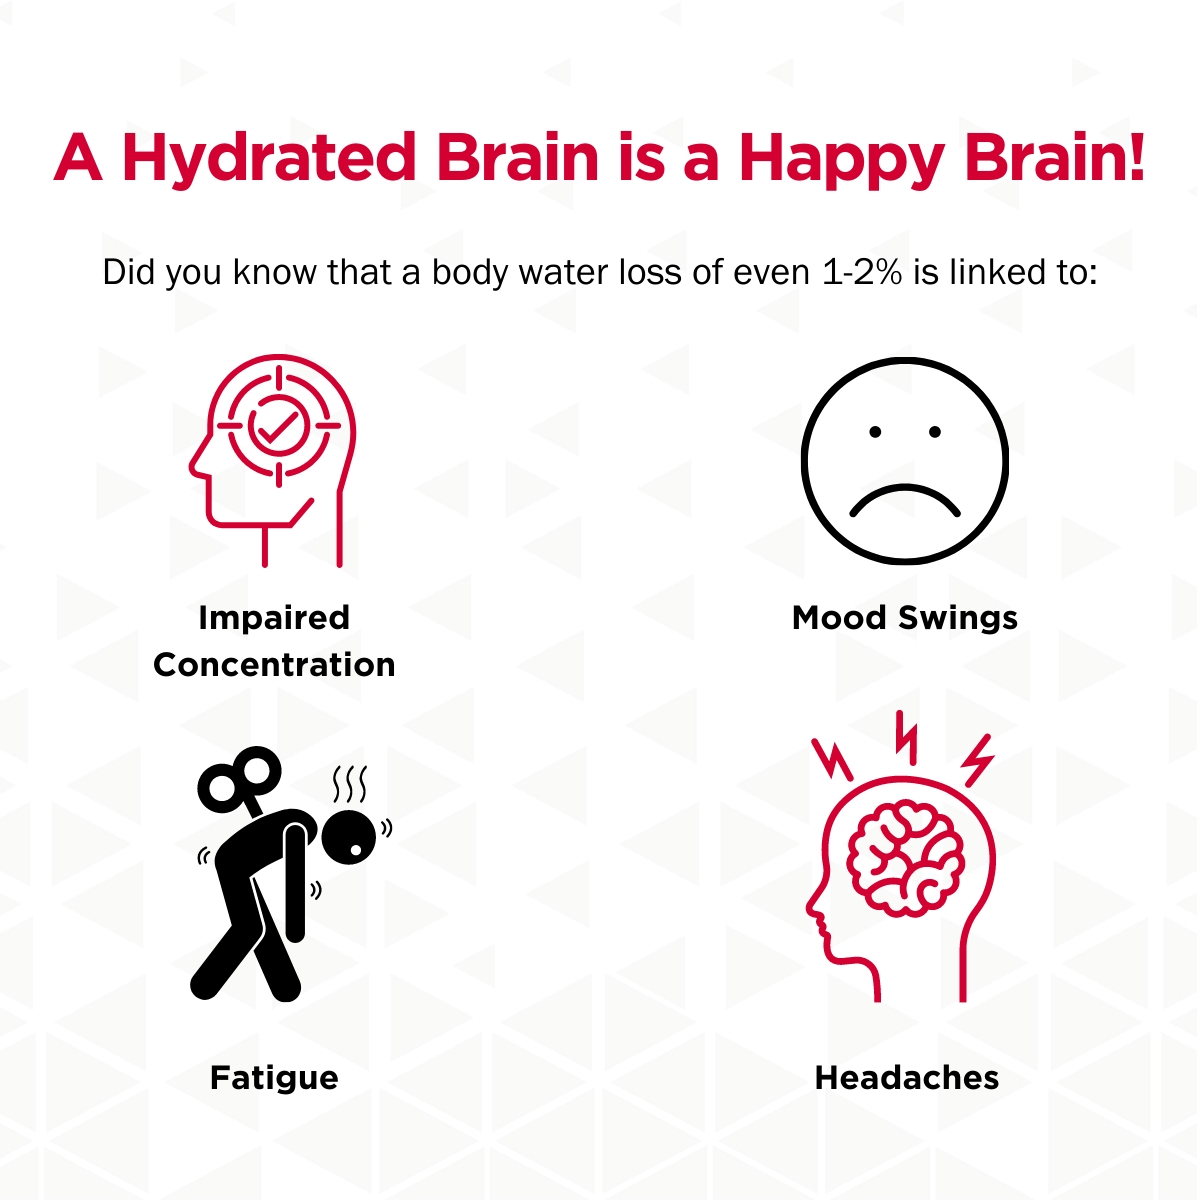 A Hydrated Brain is a Happy Brain Infographic